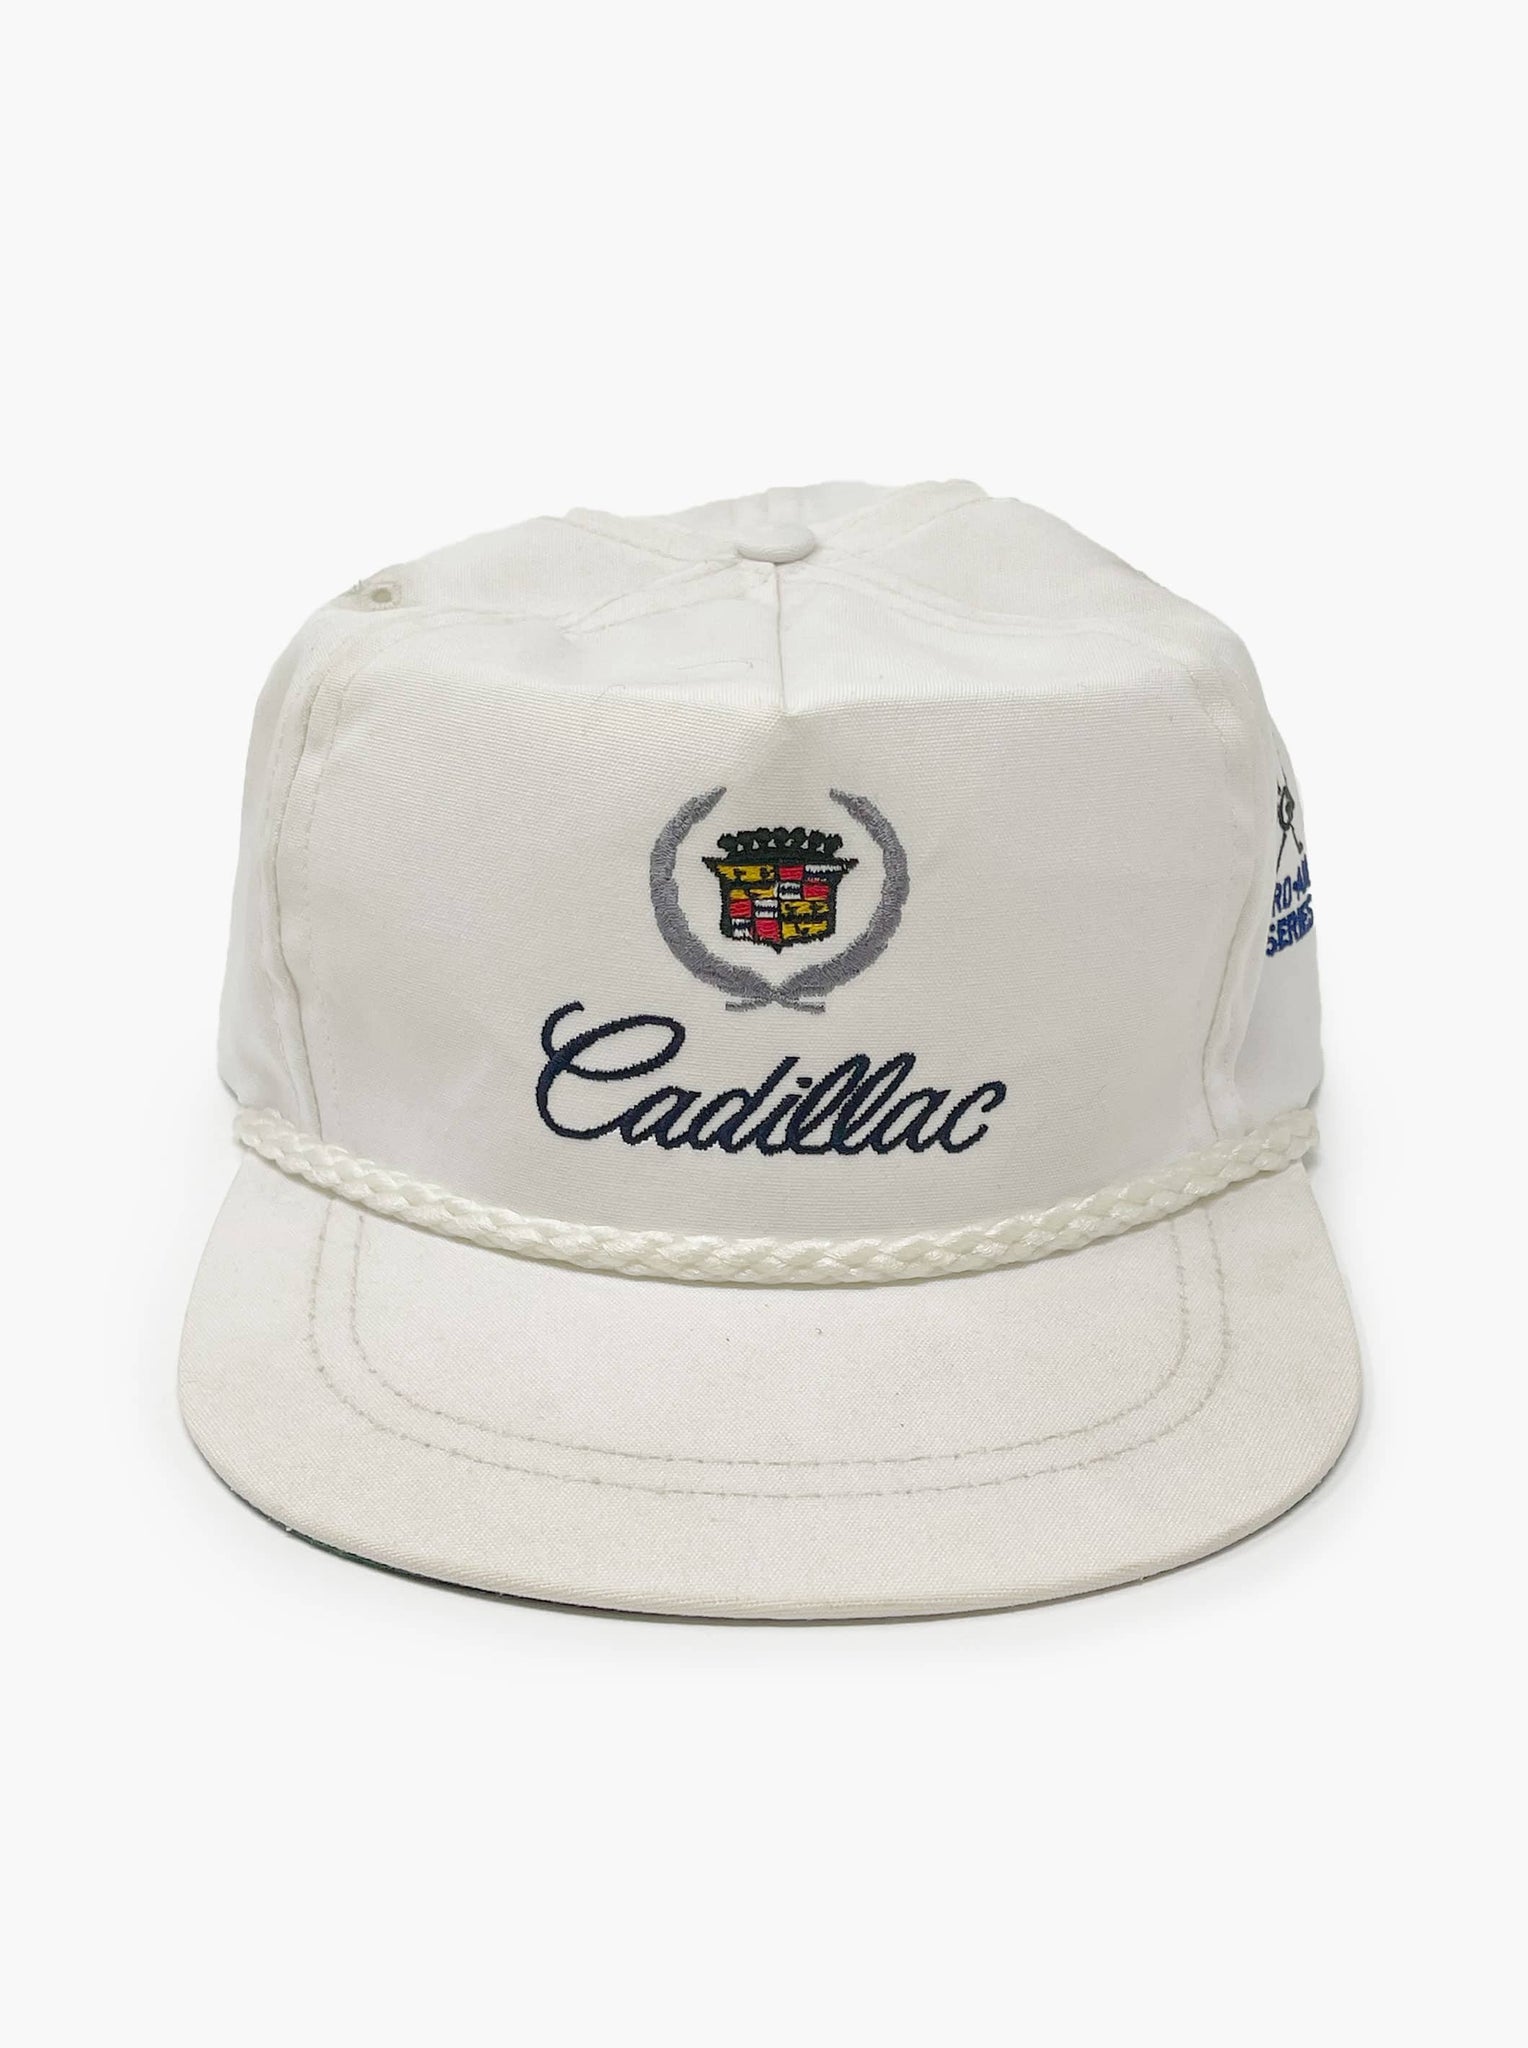 Vintage white Cadillac golf hat pro-am series - Front view - Golfitecture 